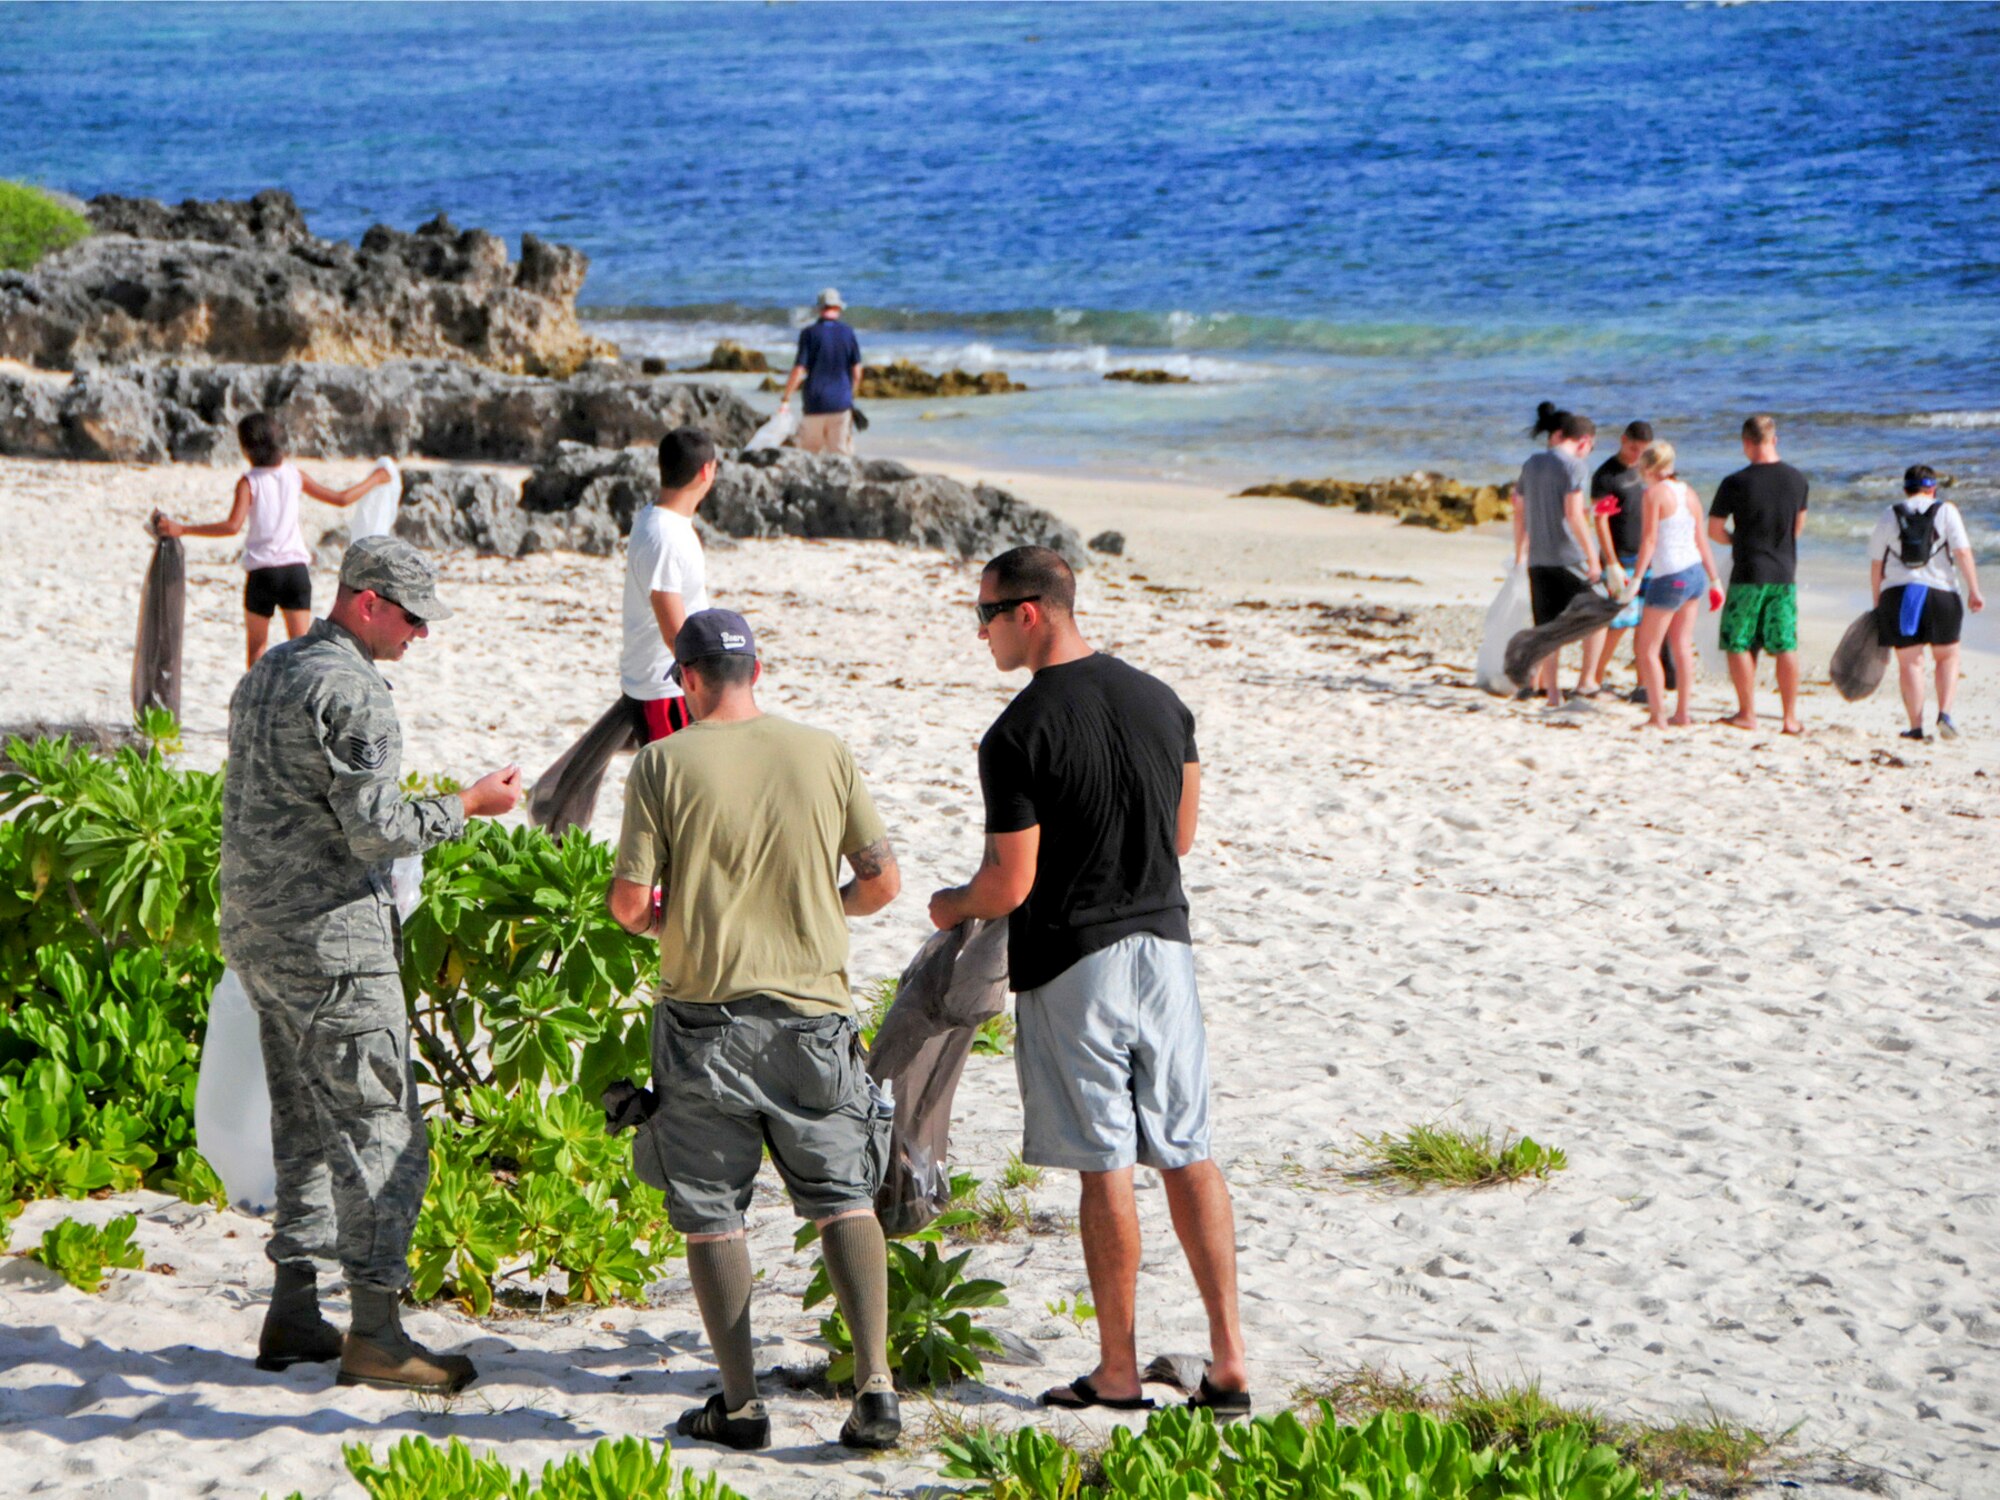 Volunteers consolidate into small groups to keep track of the amount and type of trash they collect during the Earth Day cleanup on Tarague Beach at Andersen Air Force Base, Guam, April 21, 2013. Along with collecting trash, volunteers tracked the amount and brands of the waste they collected, which was sent to the U.S. Environmental Protection Agency Regions 9 for their study on sources of rubbish in oceans. (U.S. Air Force photo by Airman 1st Class Marianique Santos/Released)